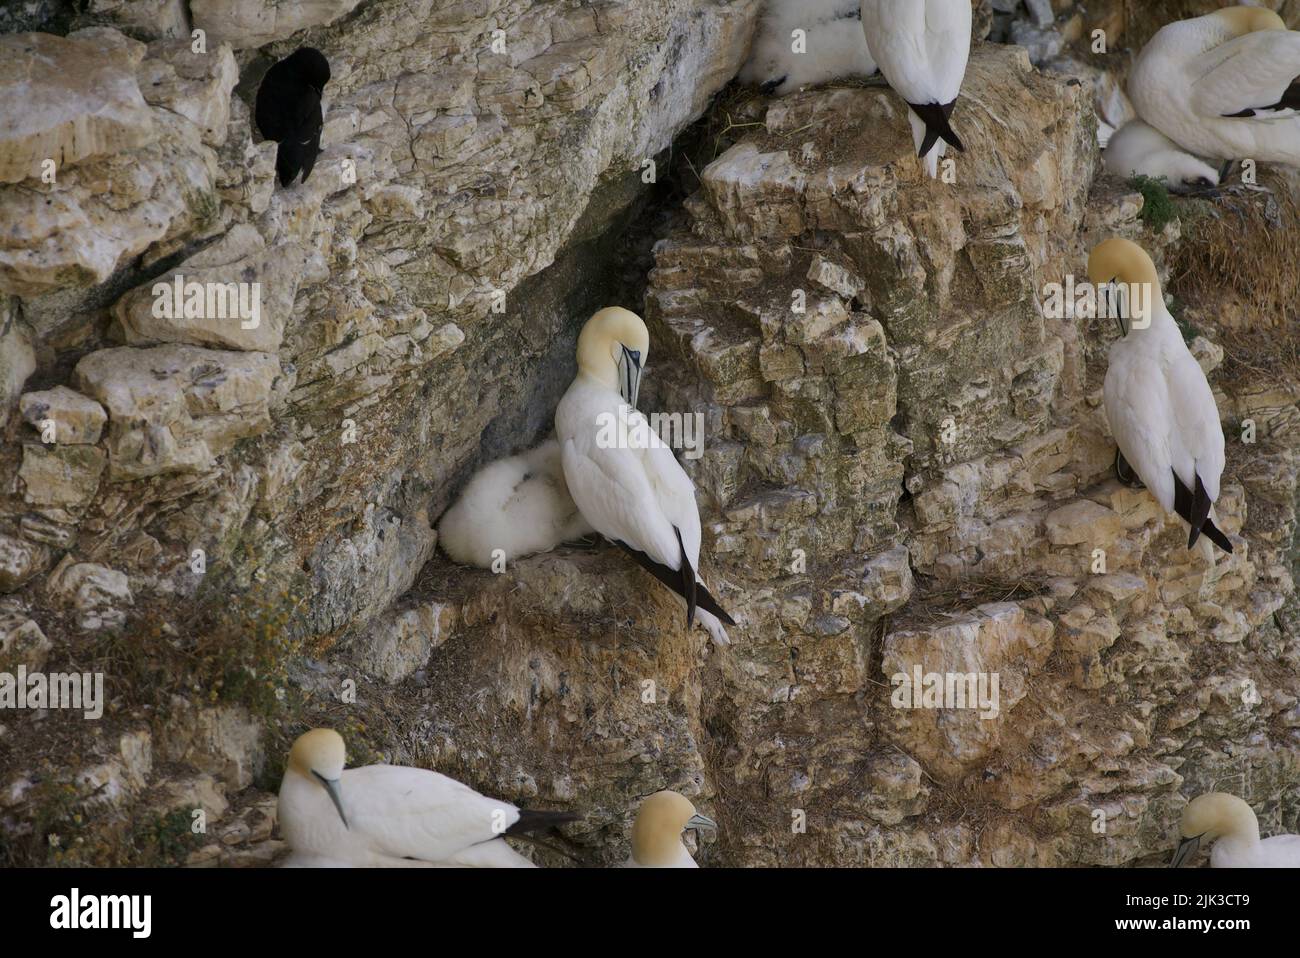 Northern Gannet colony (Morus bassanus) perched on cliff at RSPB Bempton Cliffs. Gannet sat with a chick on a cliff in Bridlington, UK. Stock Photo